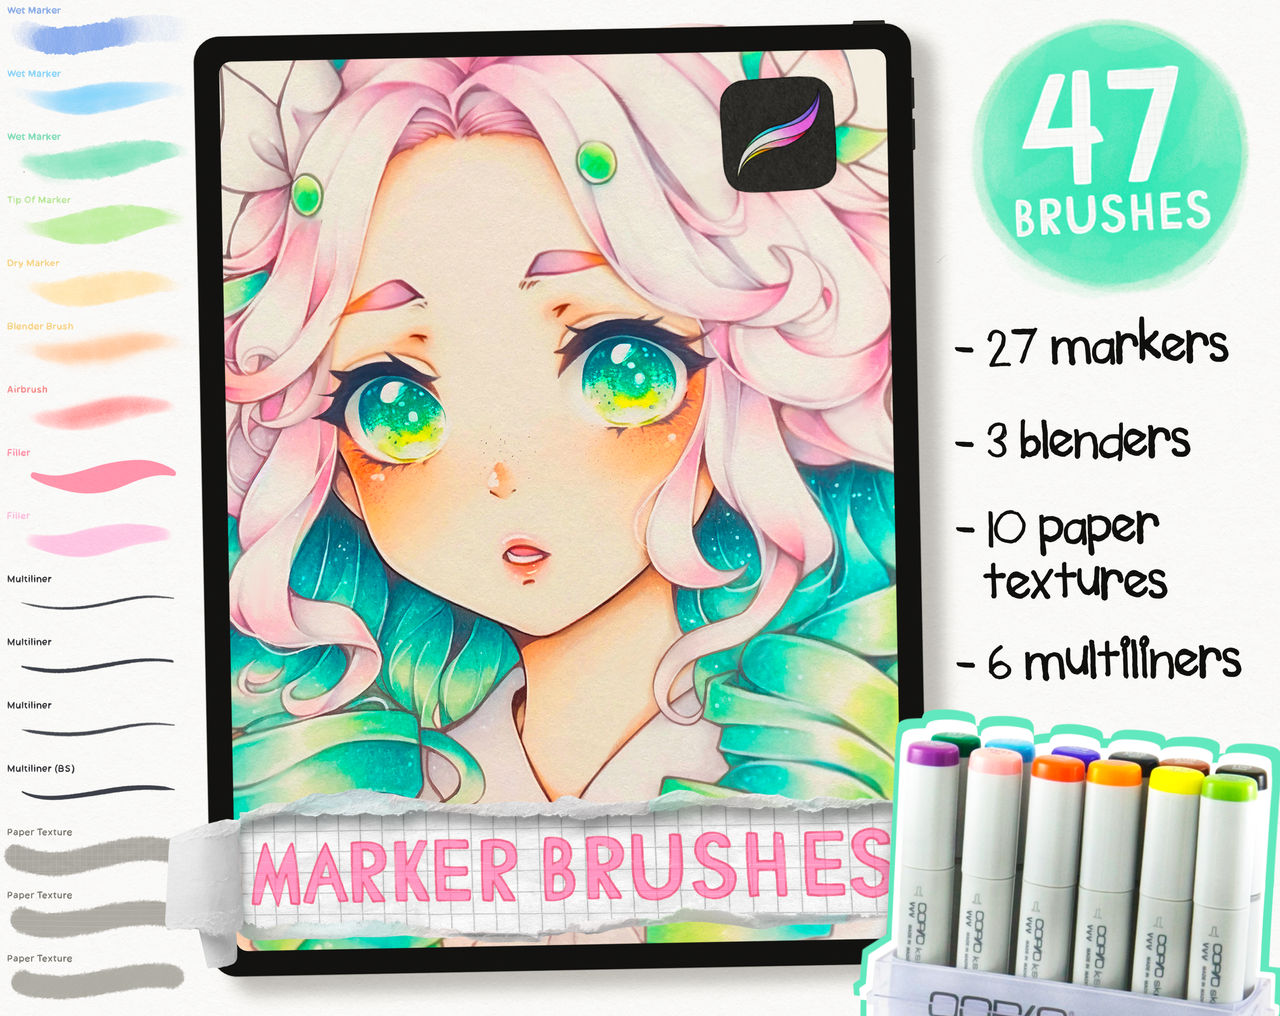 copic markers procreate free